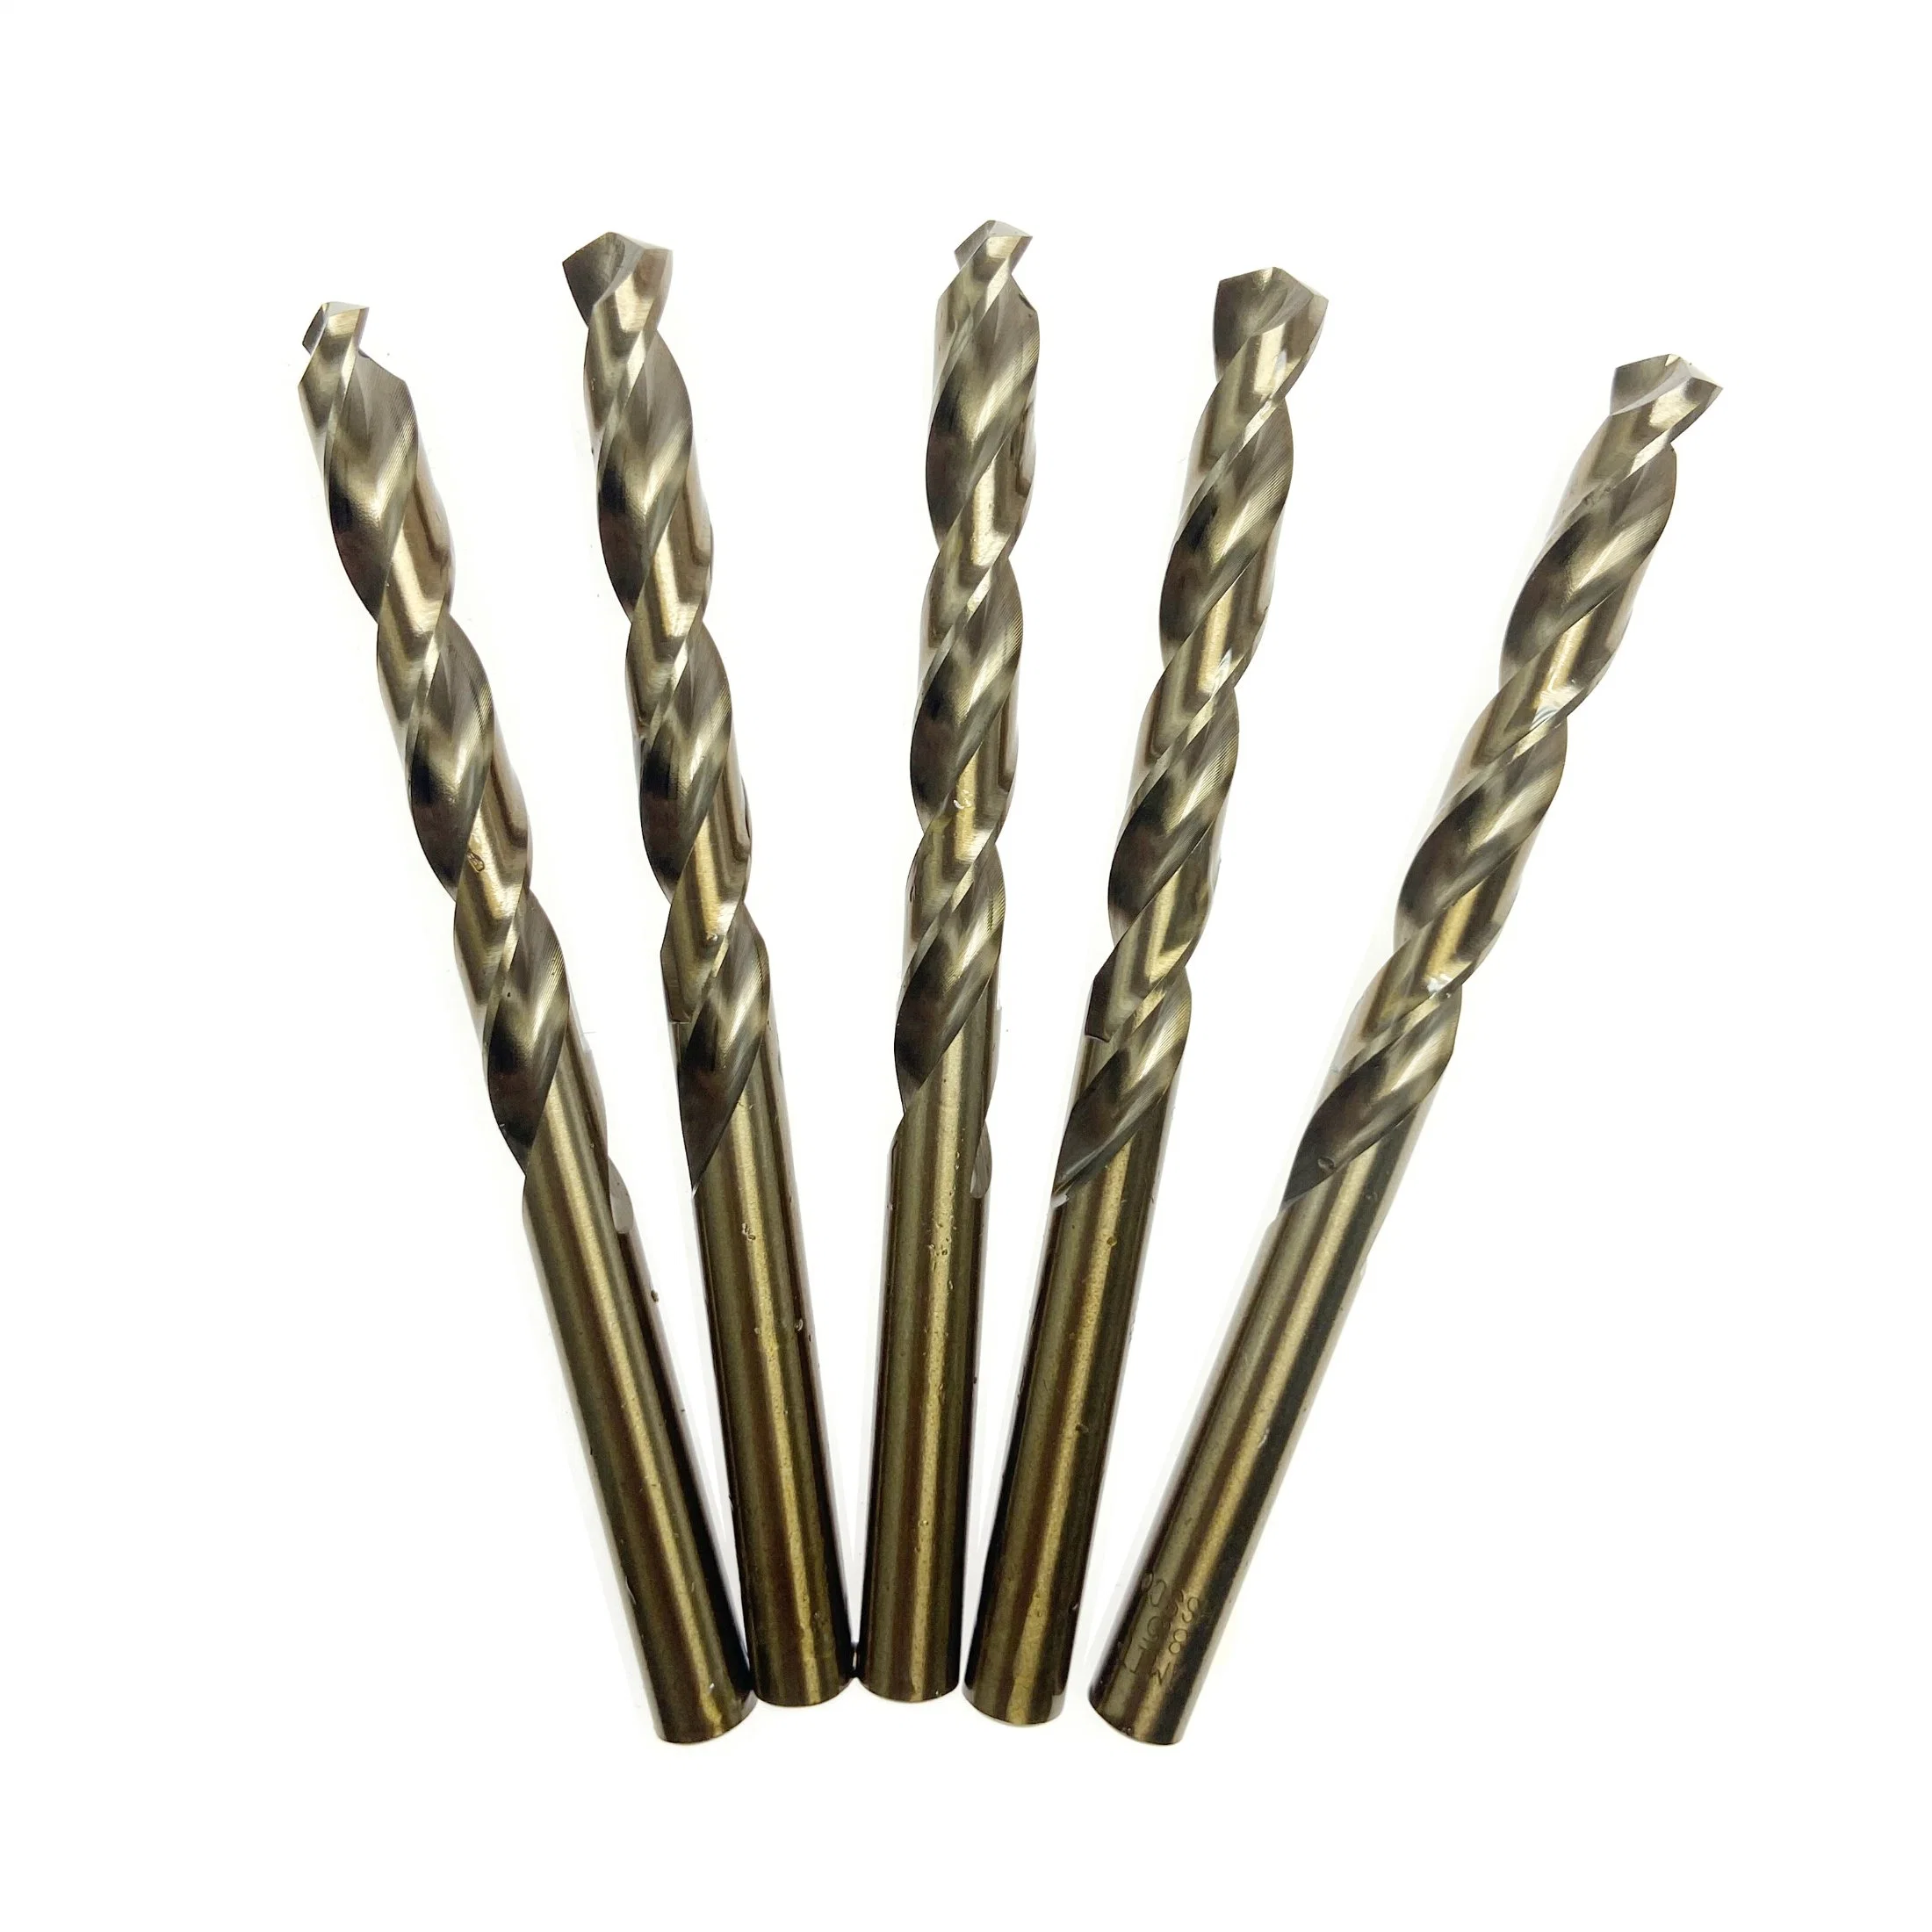 Titanium Coated Drill Bits HSS High Speed Steel Drill Bits Set Tool High quality/High cost performance Power Tools